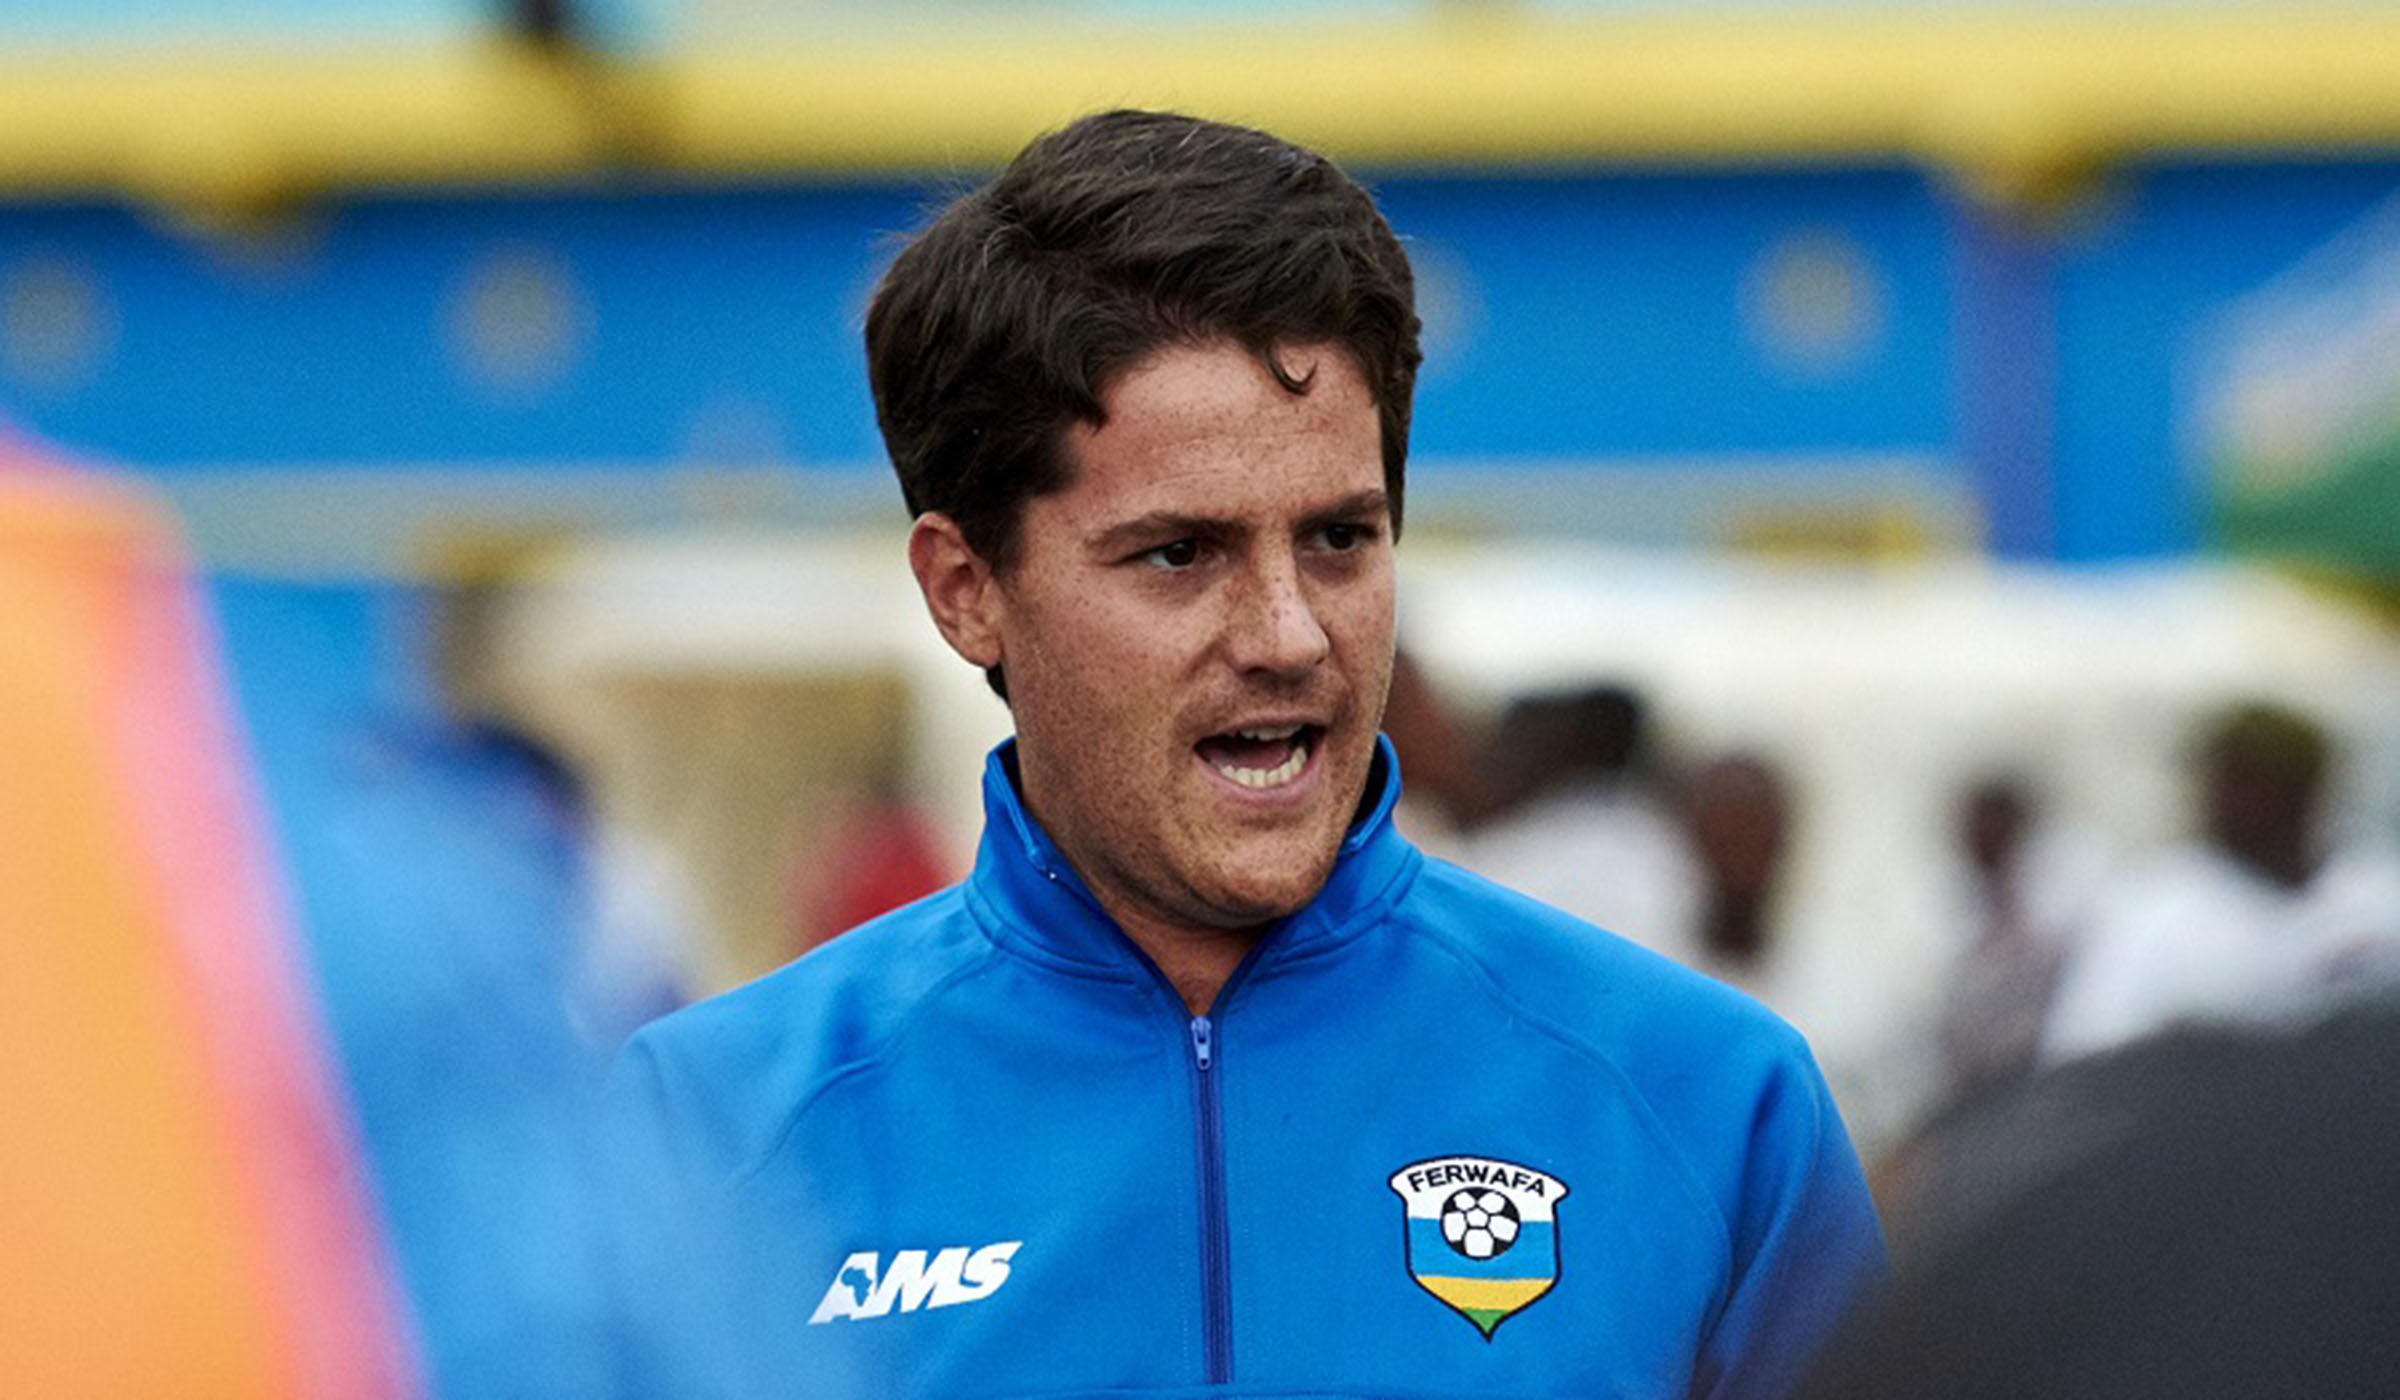 Johnny McKinstry, who was appointed as Amavubi head coach at the age of 29, gives instructions to his players during training at Amahoro Stadium ahead of 2016 CHAN finals. File.